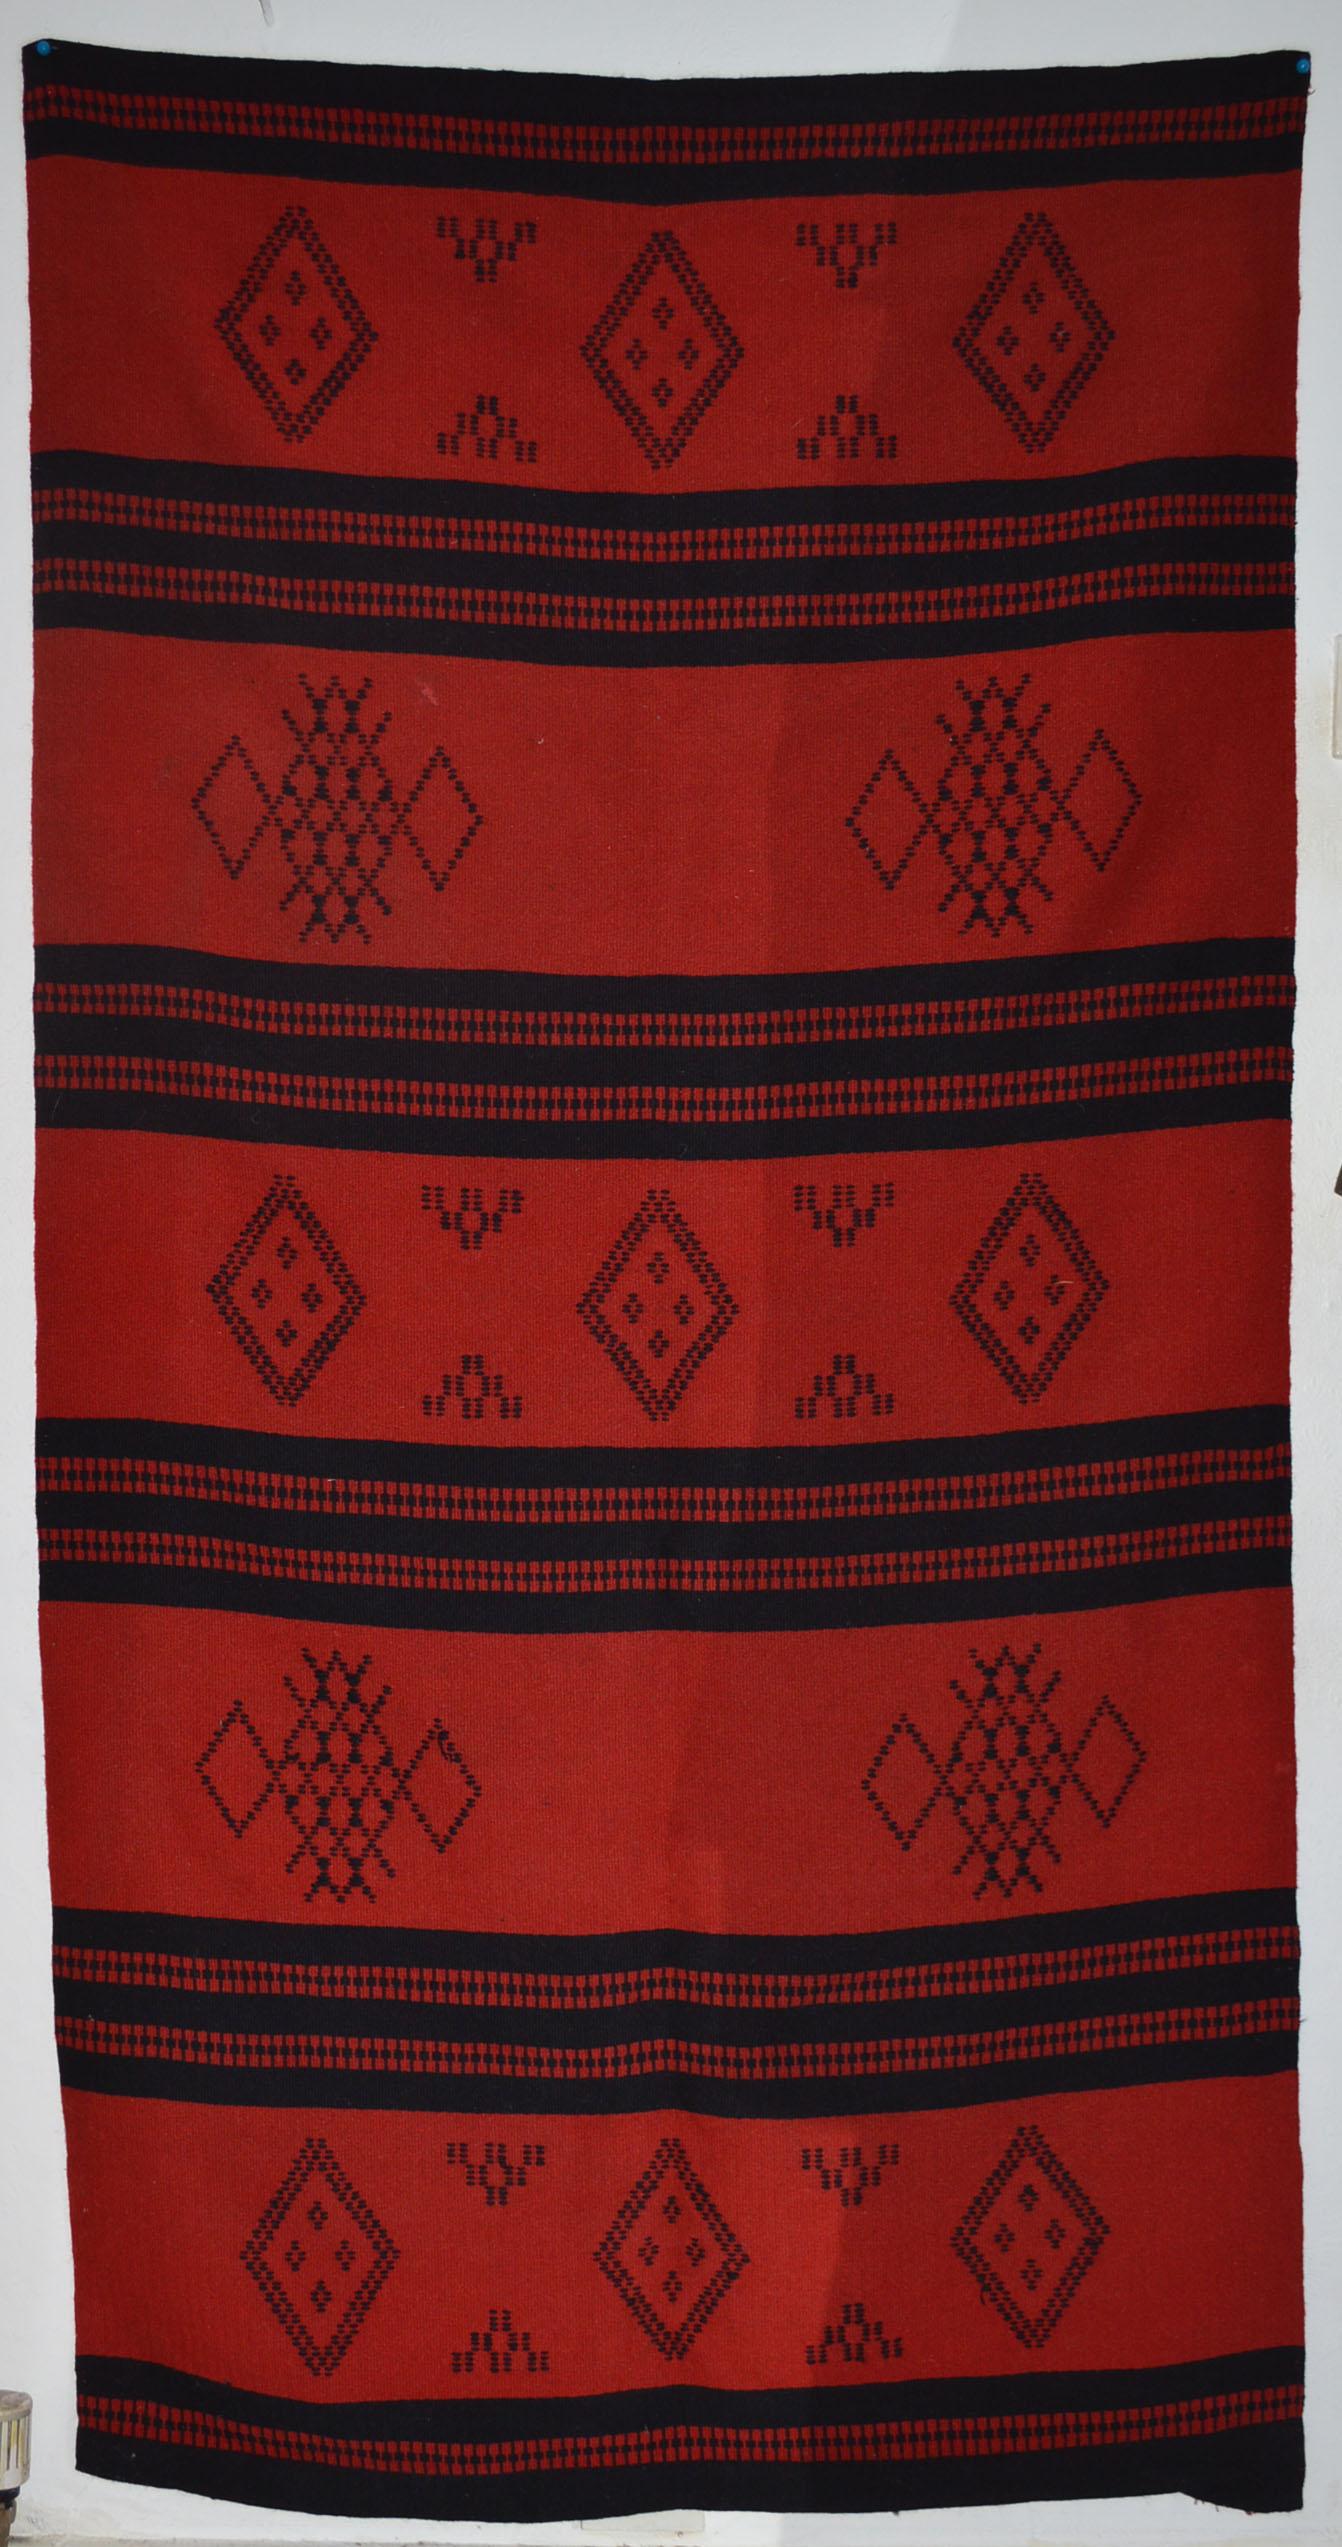 Vintage Swedish Modernist design wool wall rug 
Finely woven wool rug somewhat reminiscent of a native American Navajo Chiefs blanket
168 x 86 cm approximate
Period 1960s
Condition; Good.